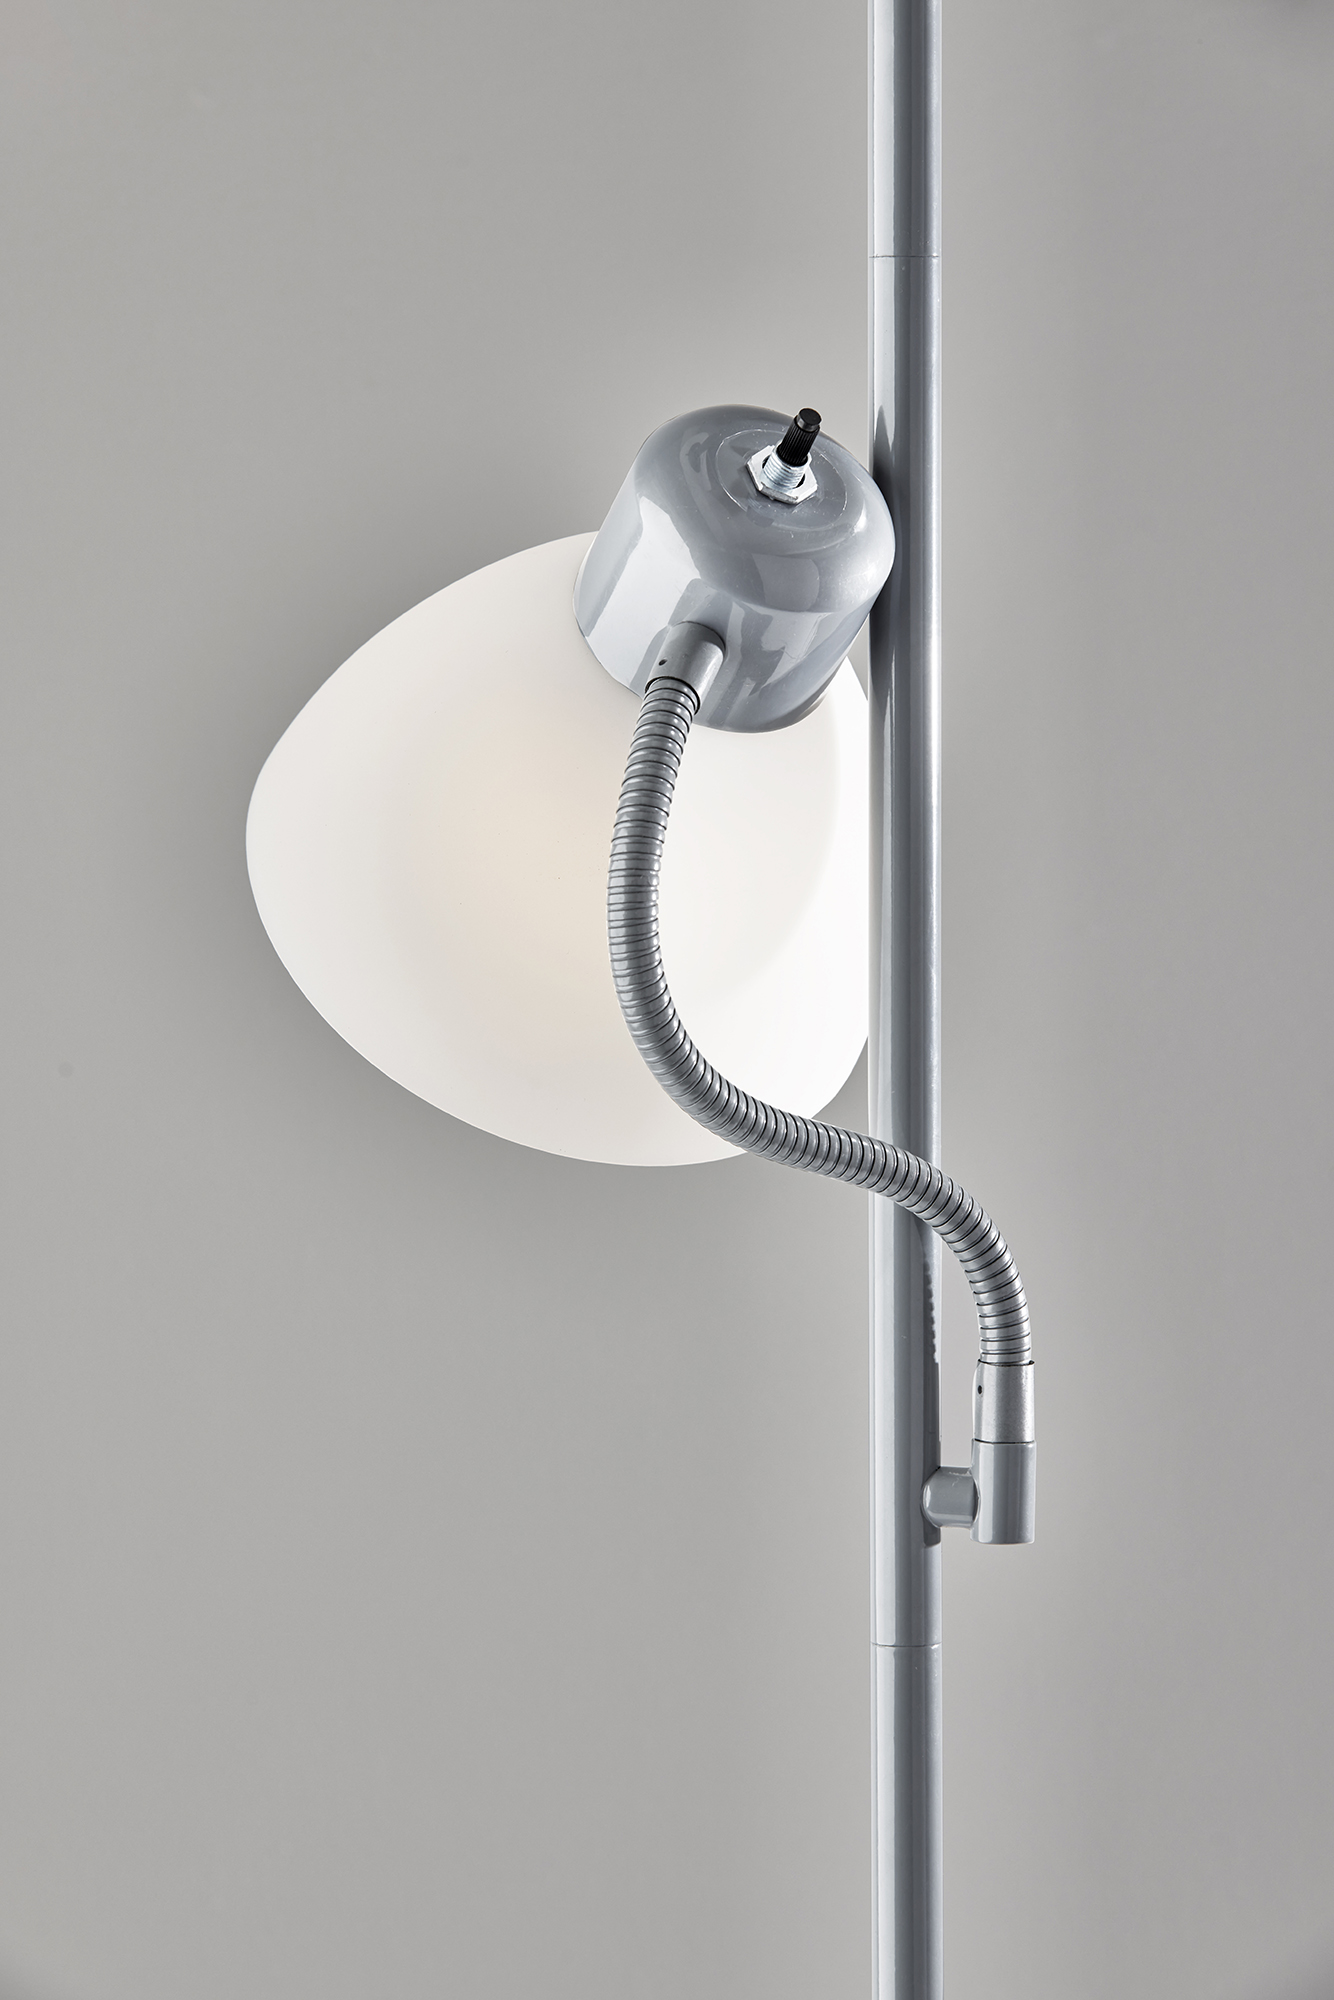 Mainstays 72'' Combo Floor Lamp & Reading Lamp, Silver, Plastic, Modern, For Home and Office Use - image 5 of 7